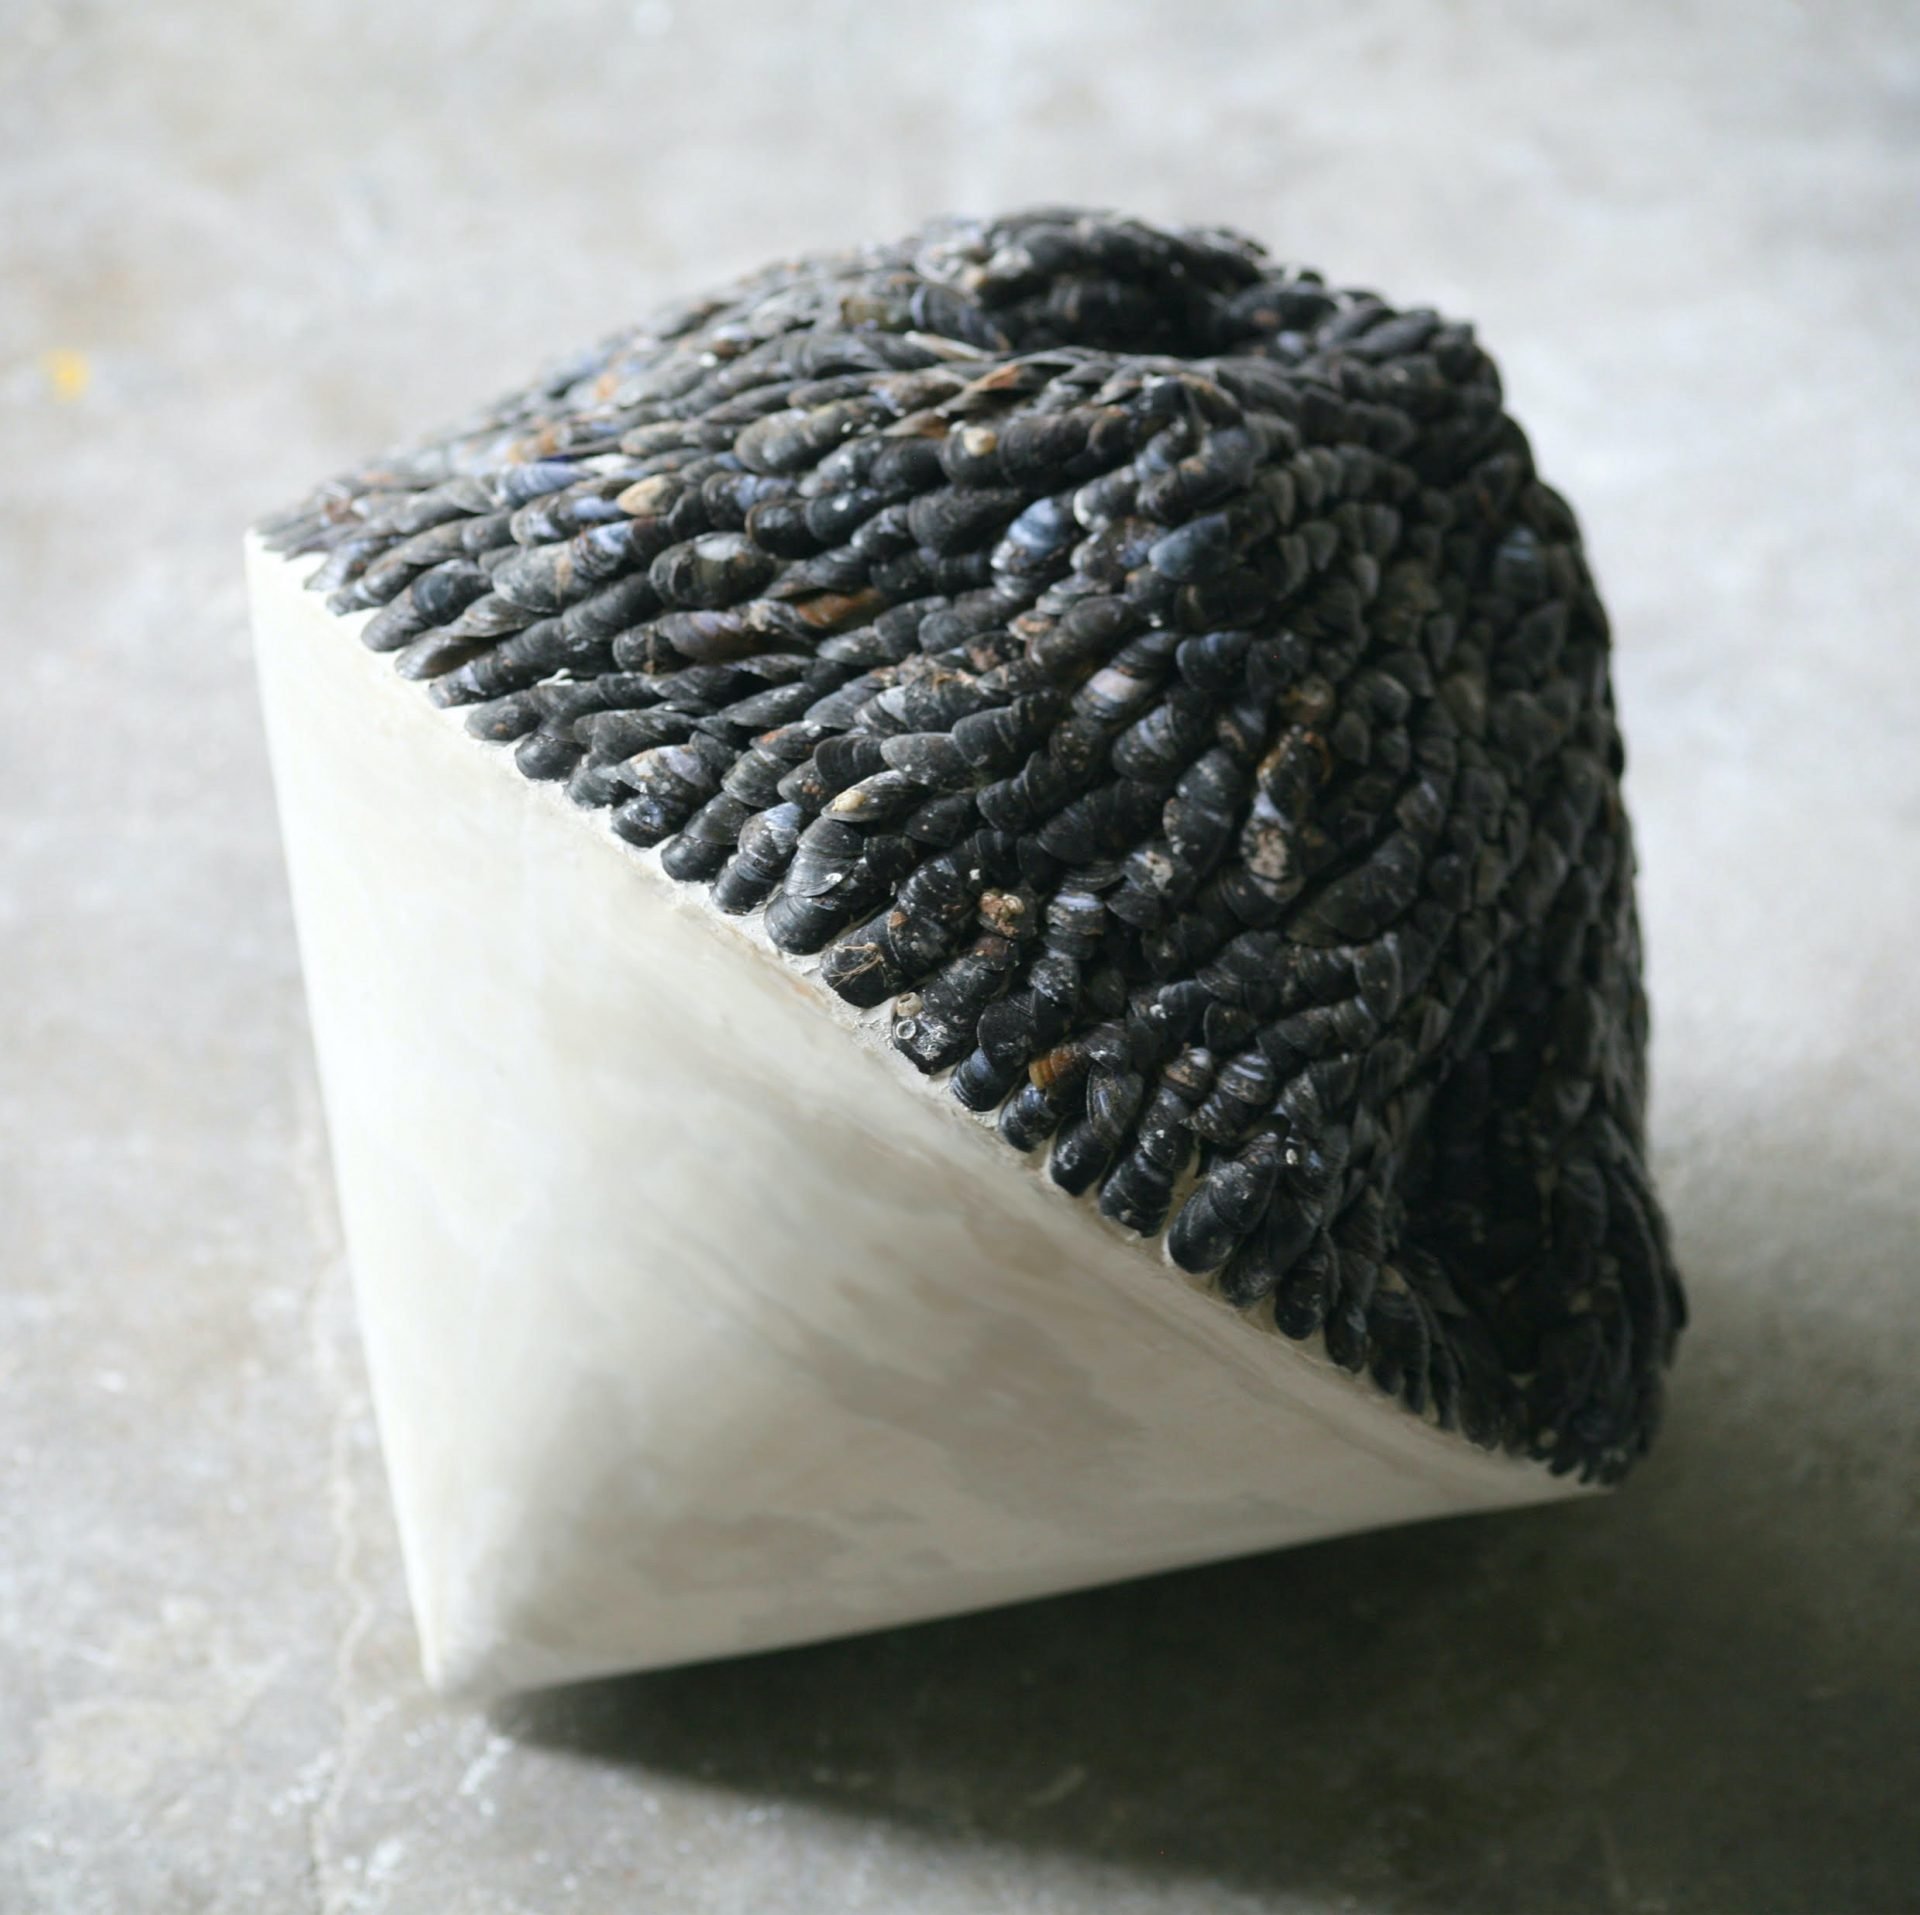 Stephanie Tudor Sculpture with mussels